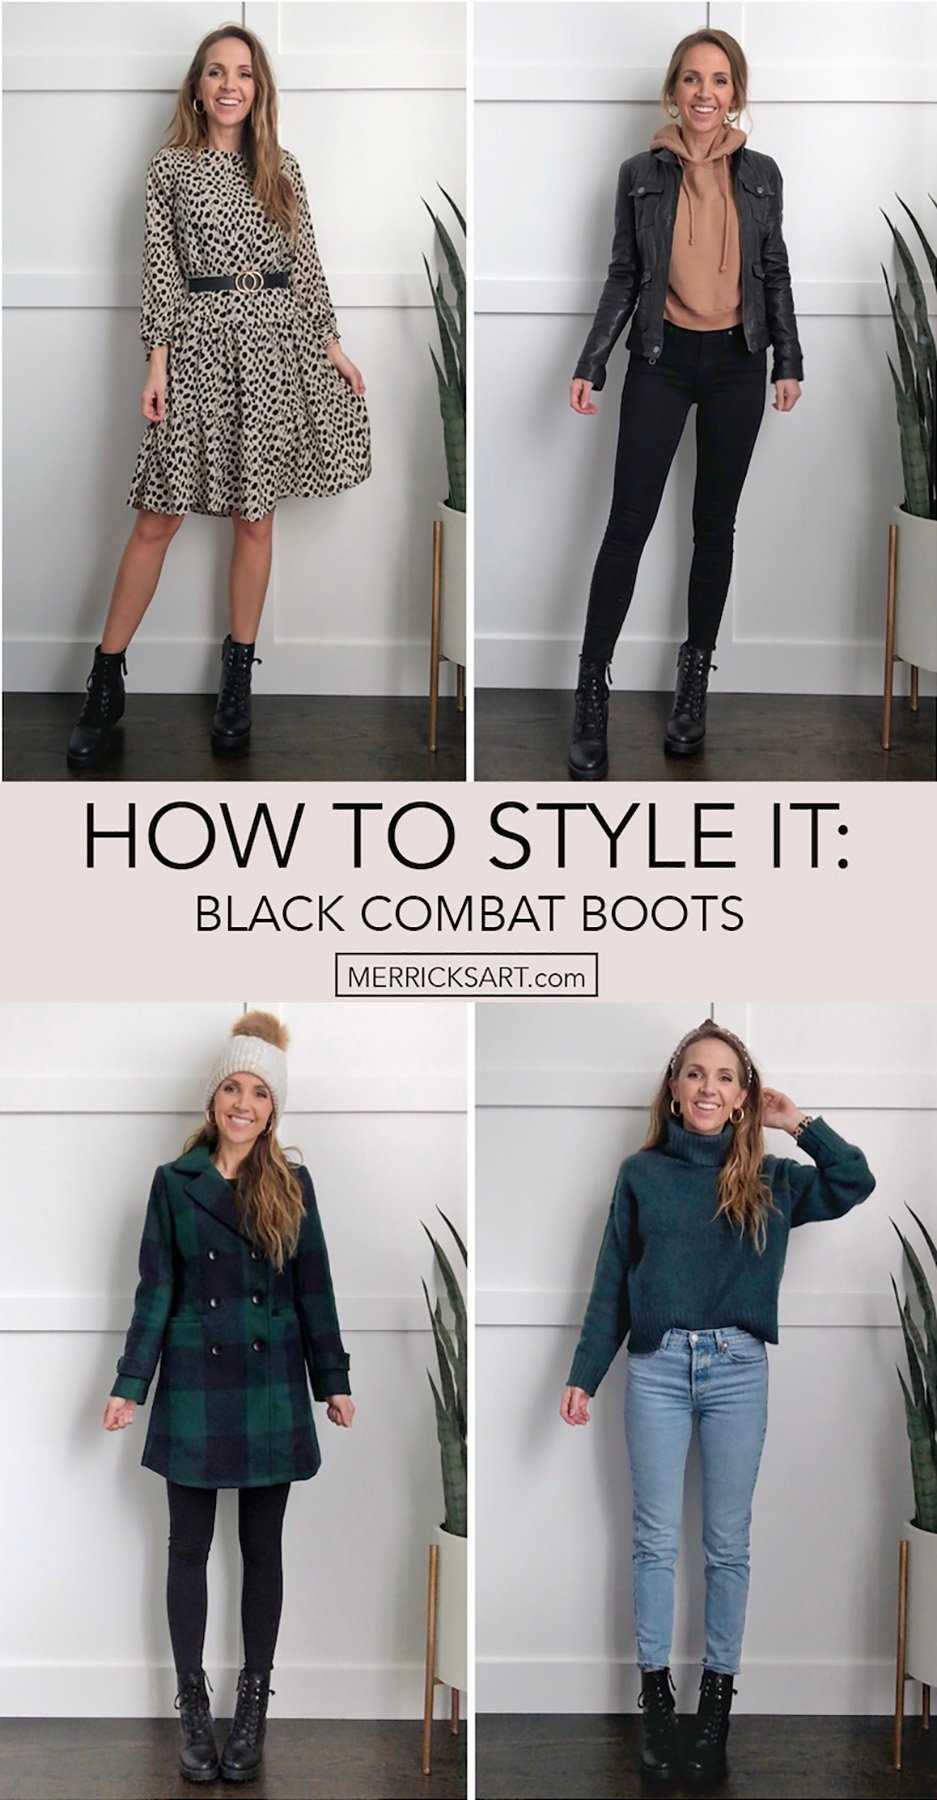 How to wear military boots